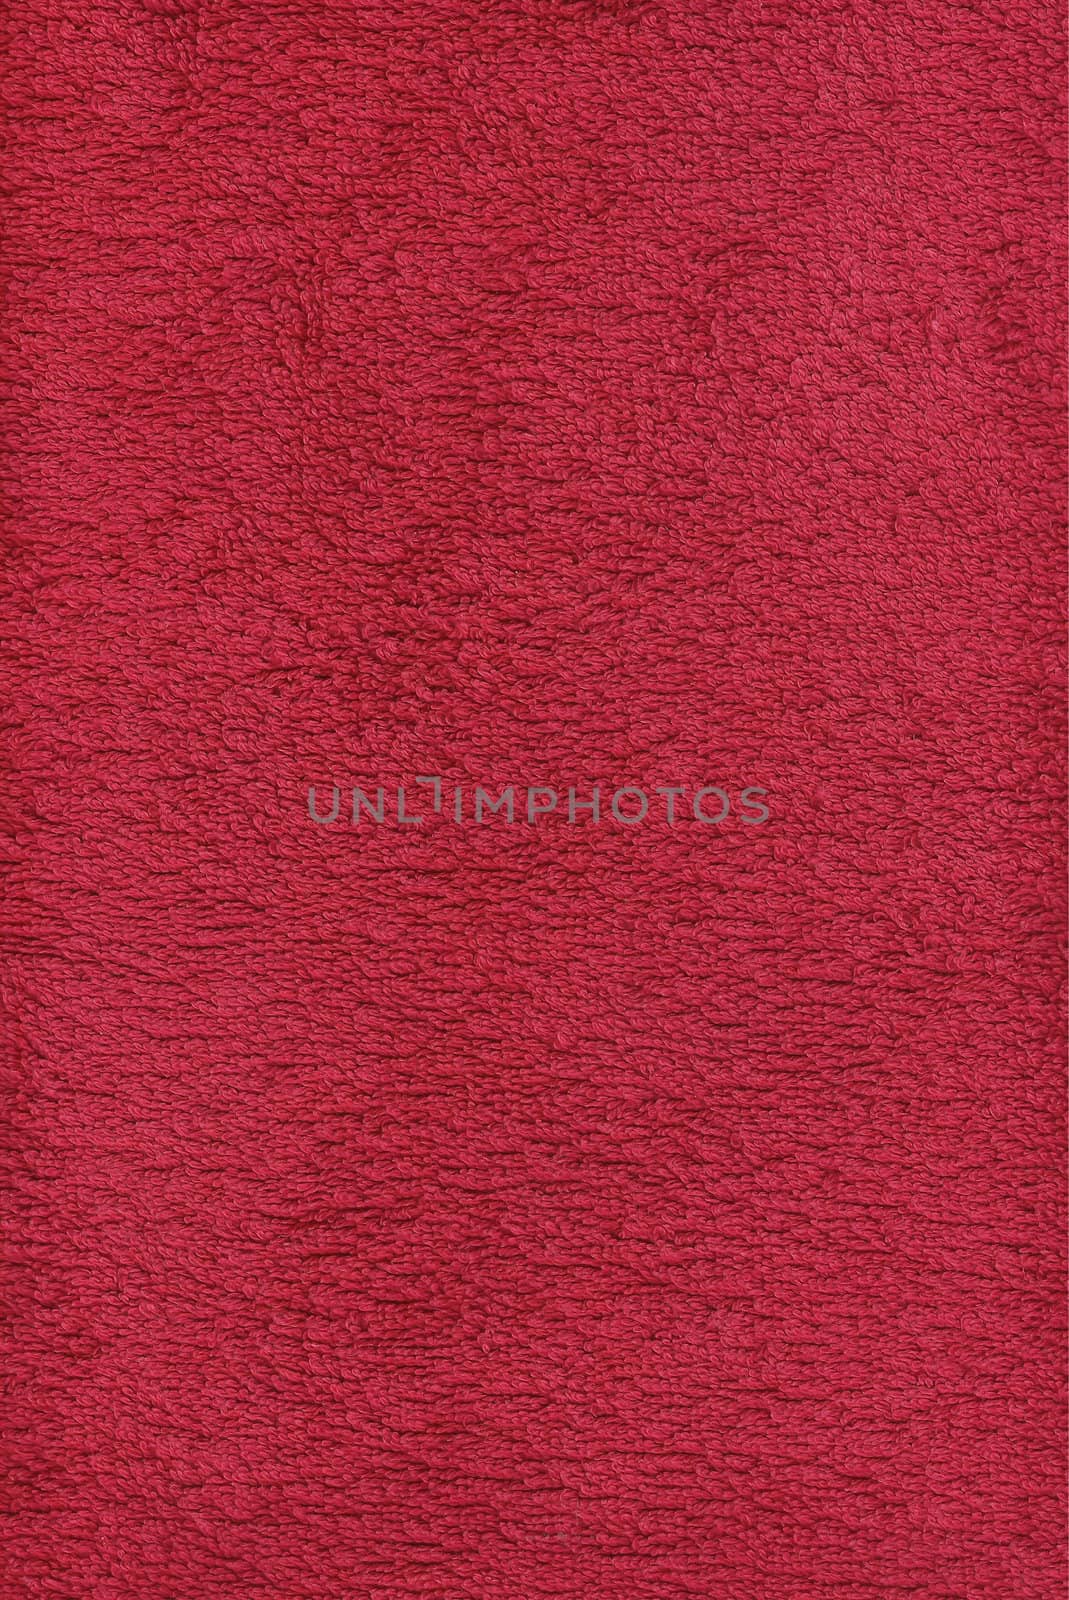 Red color towel background